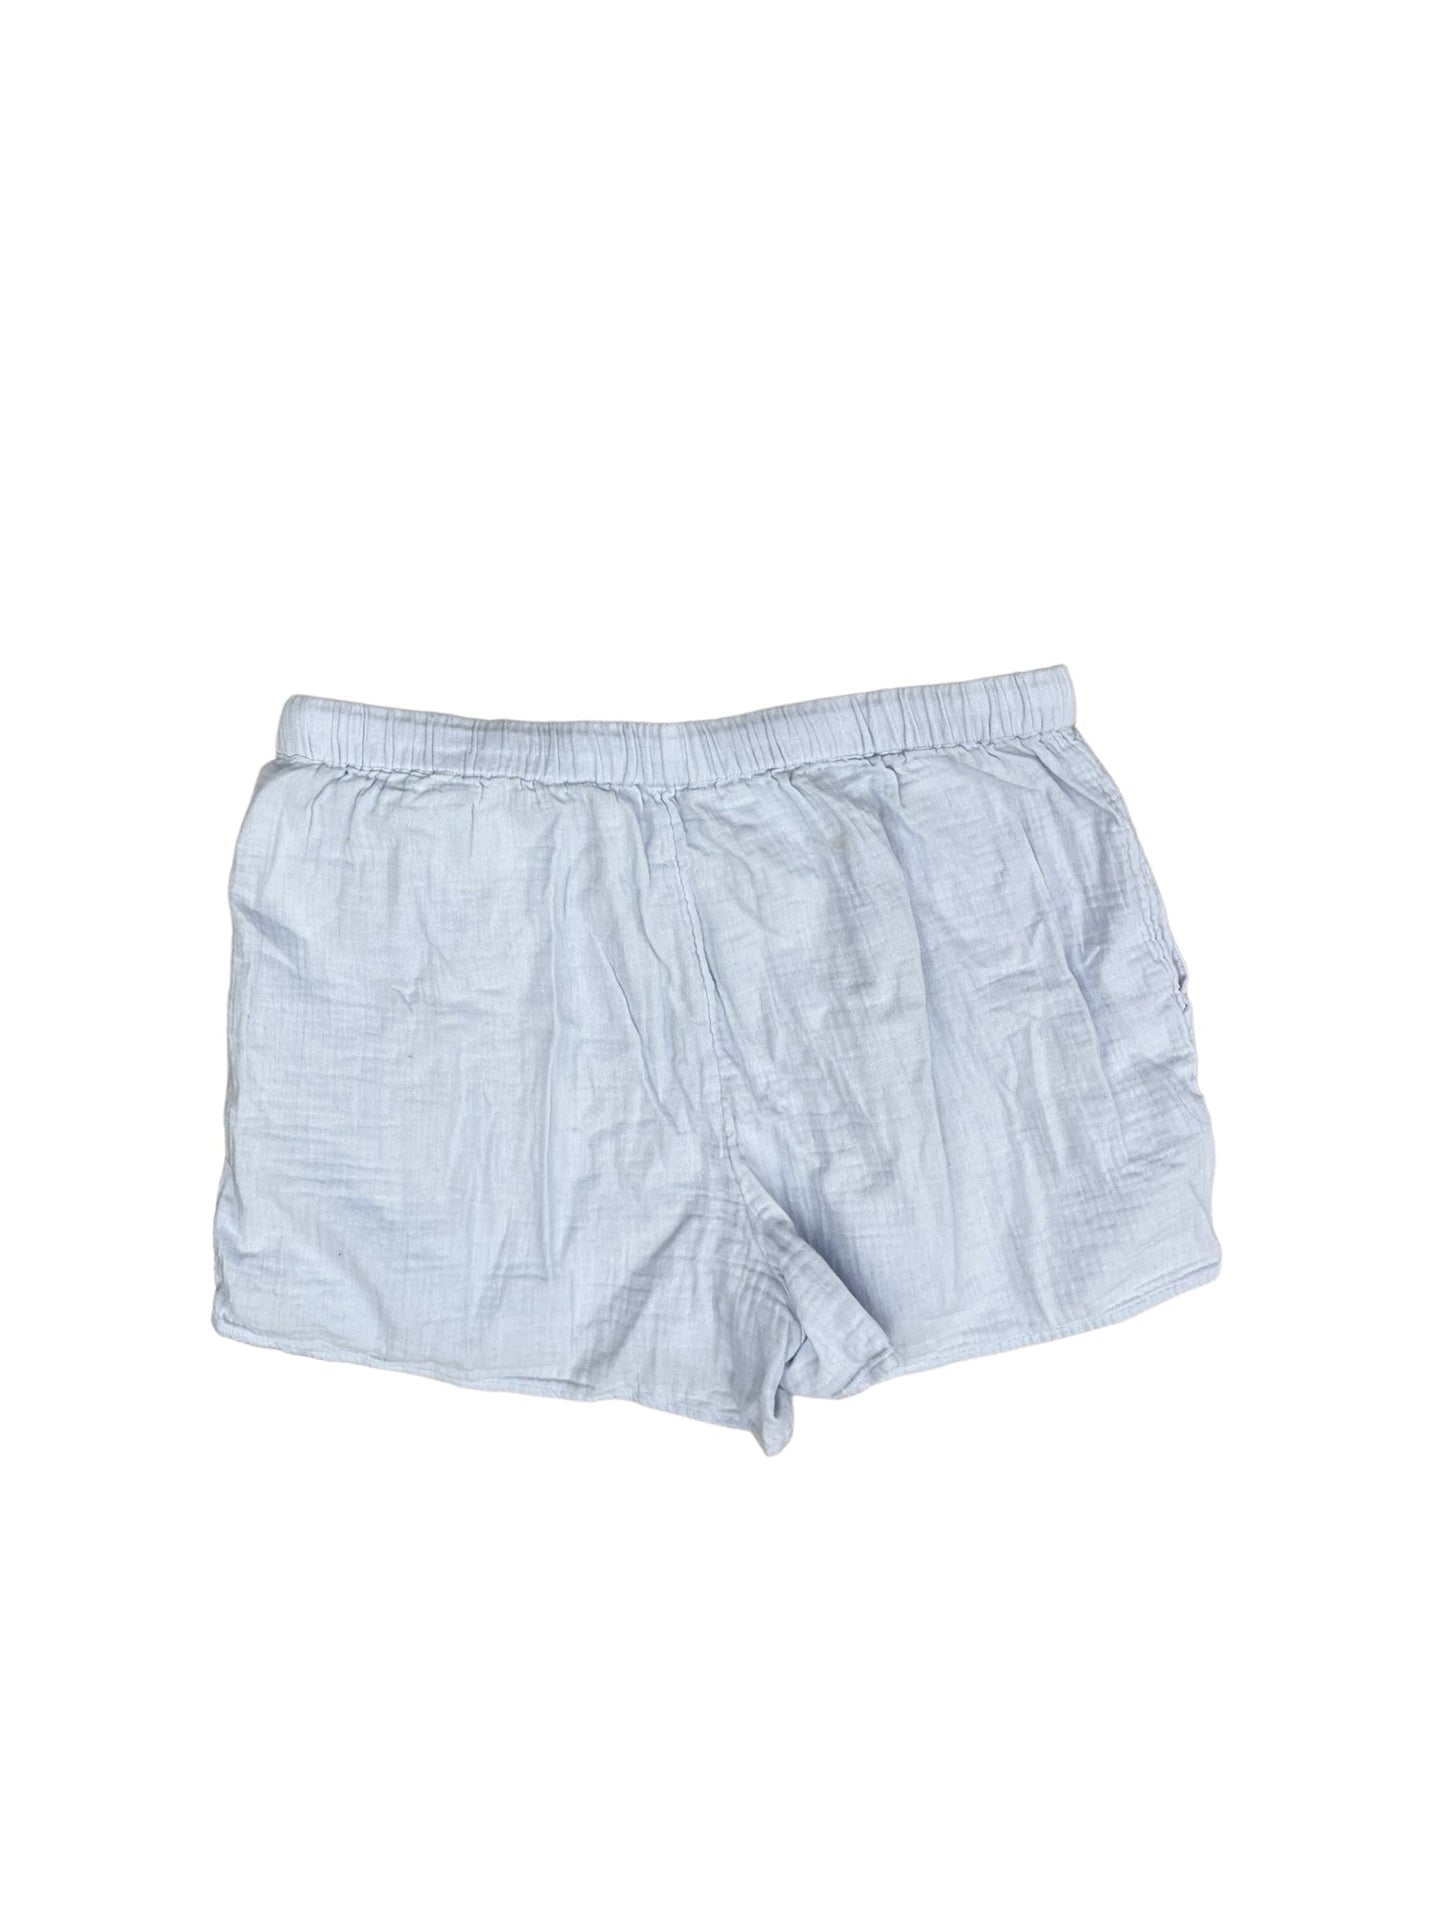 Shorts By Wilfred  Size: L